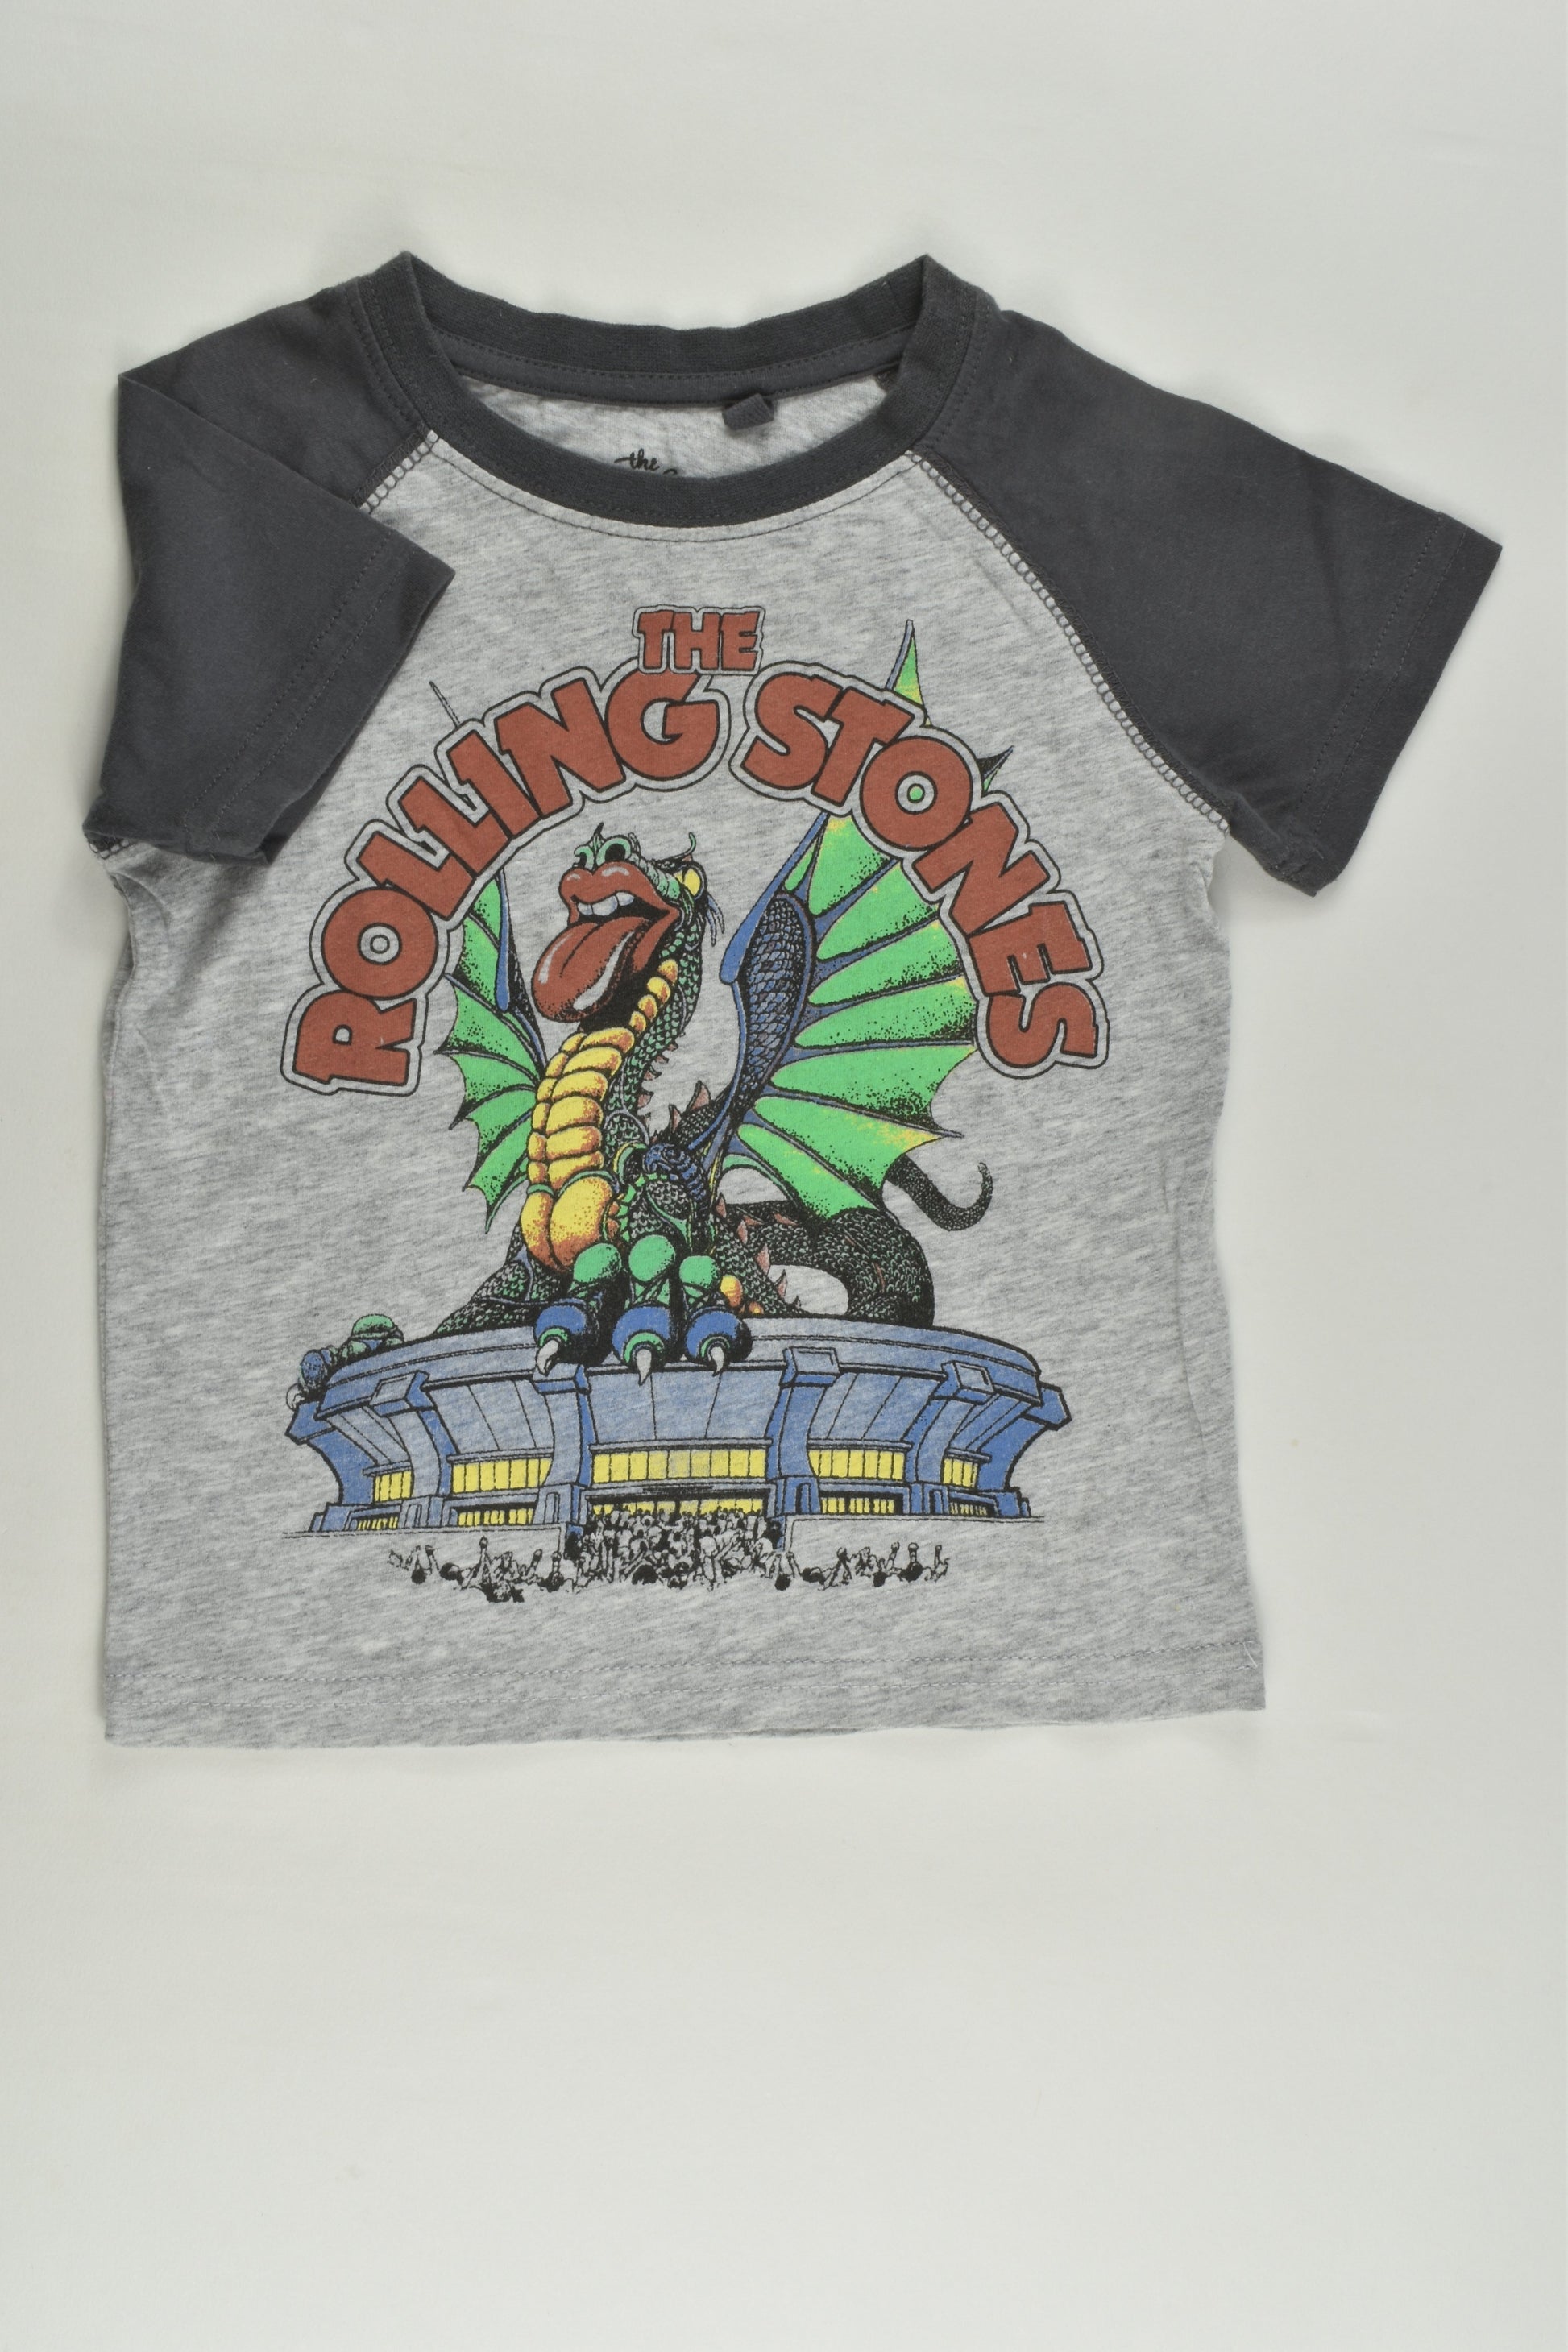 Cotton On Kids Size 1 The Rolling Stones T-shirt